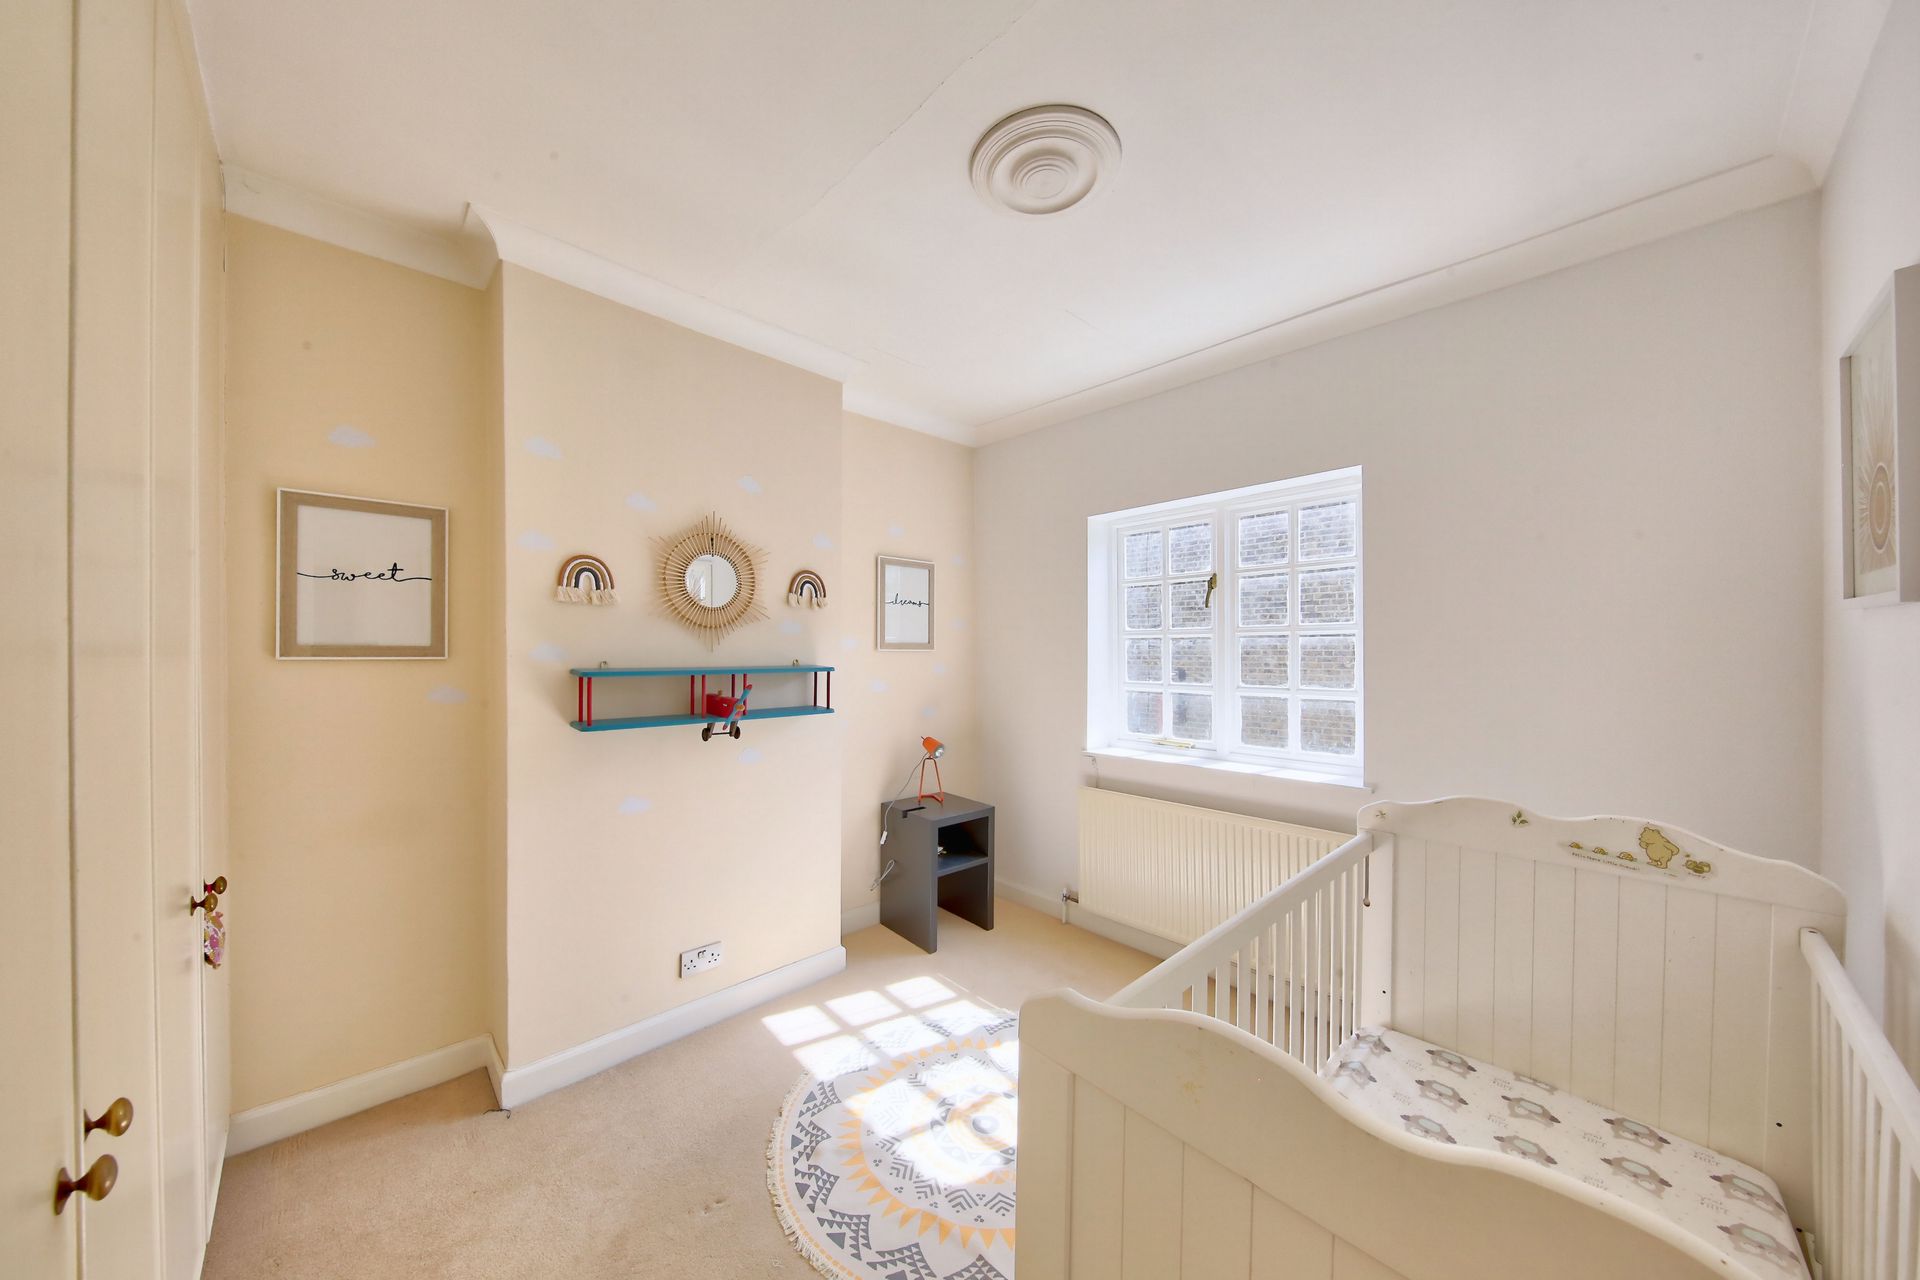 2 bedrooms house, Tonsley Place Wandsworth